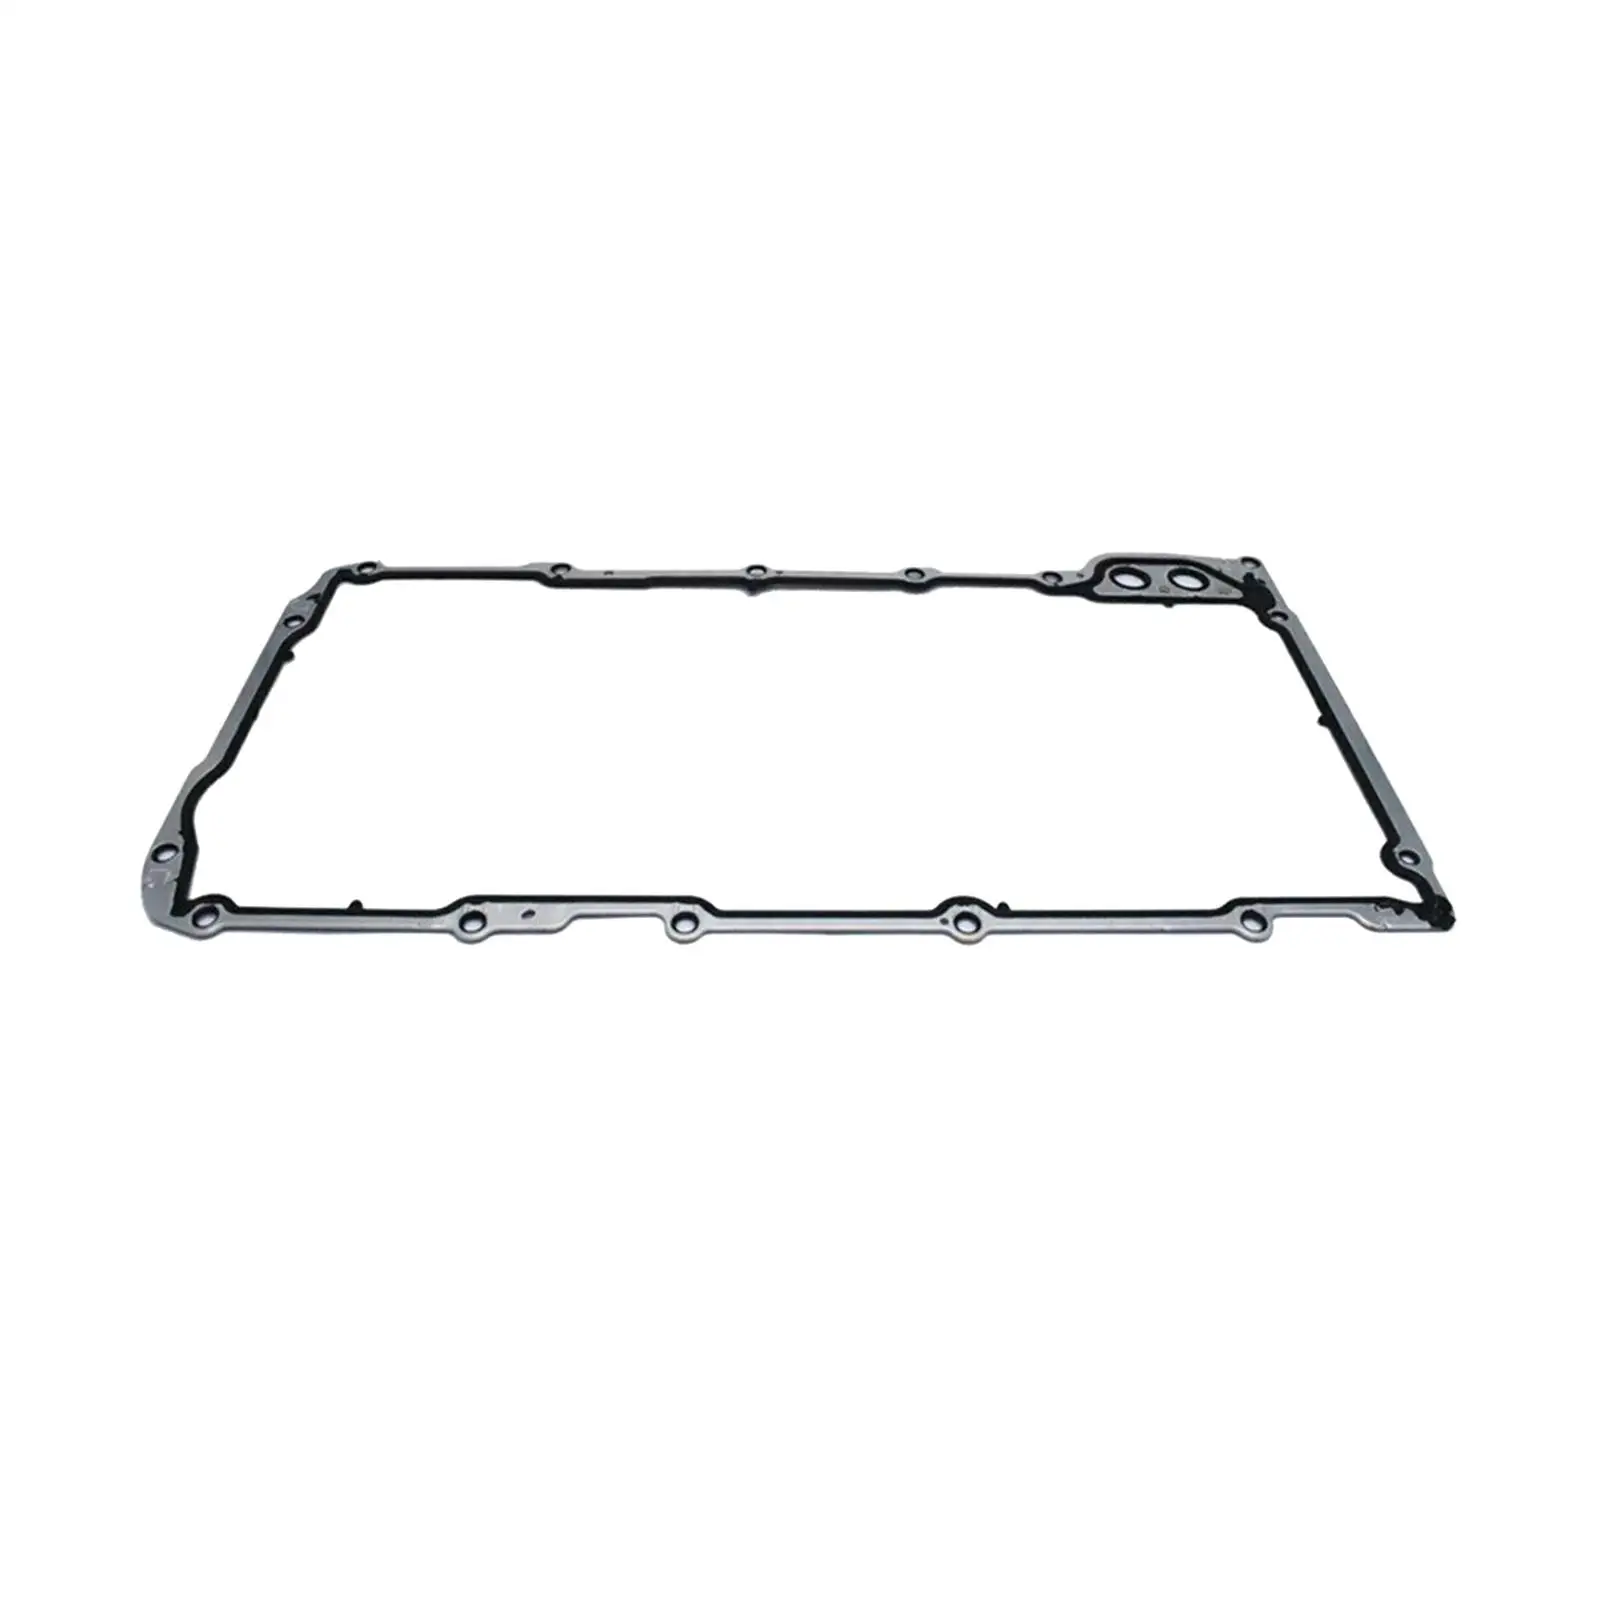 Oil Pan Gasket OS32241 for Hummer Spare Parts Replacement Premium Car Accessories